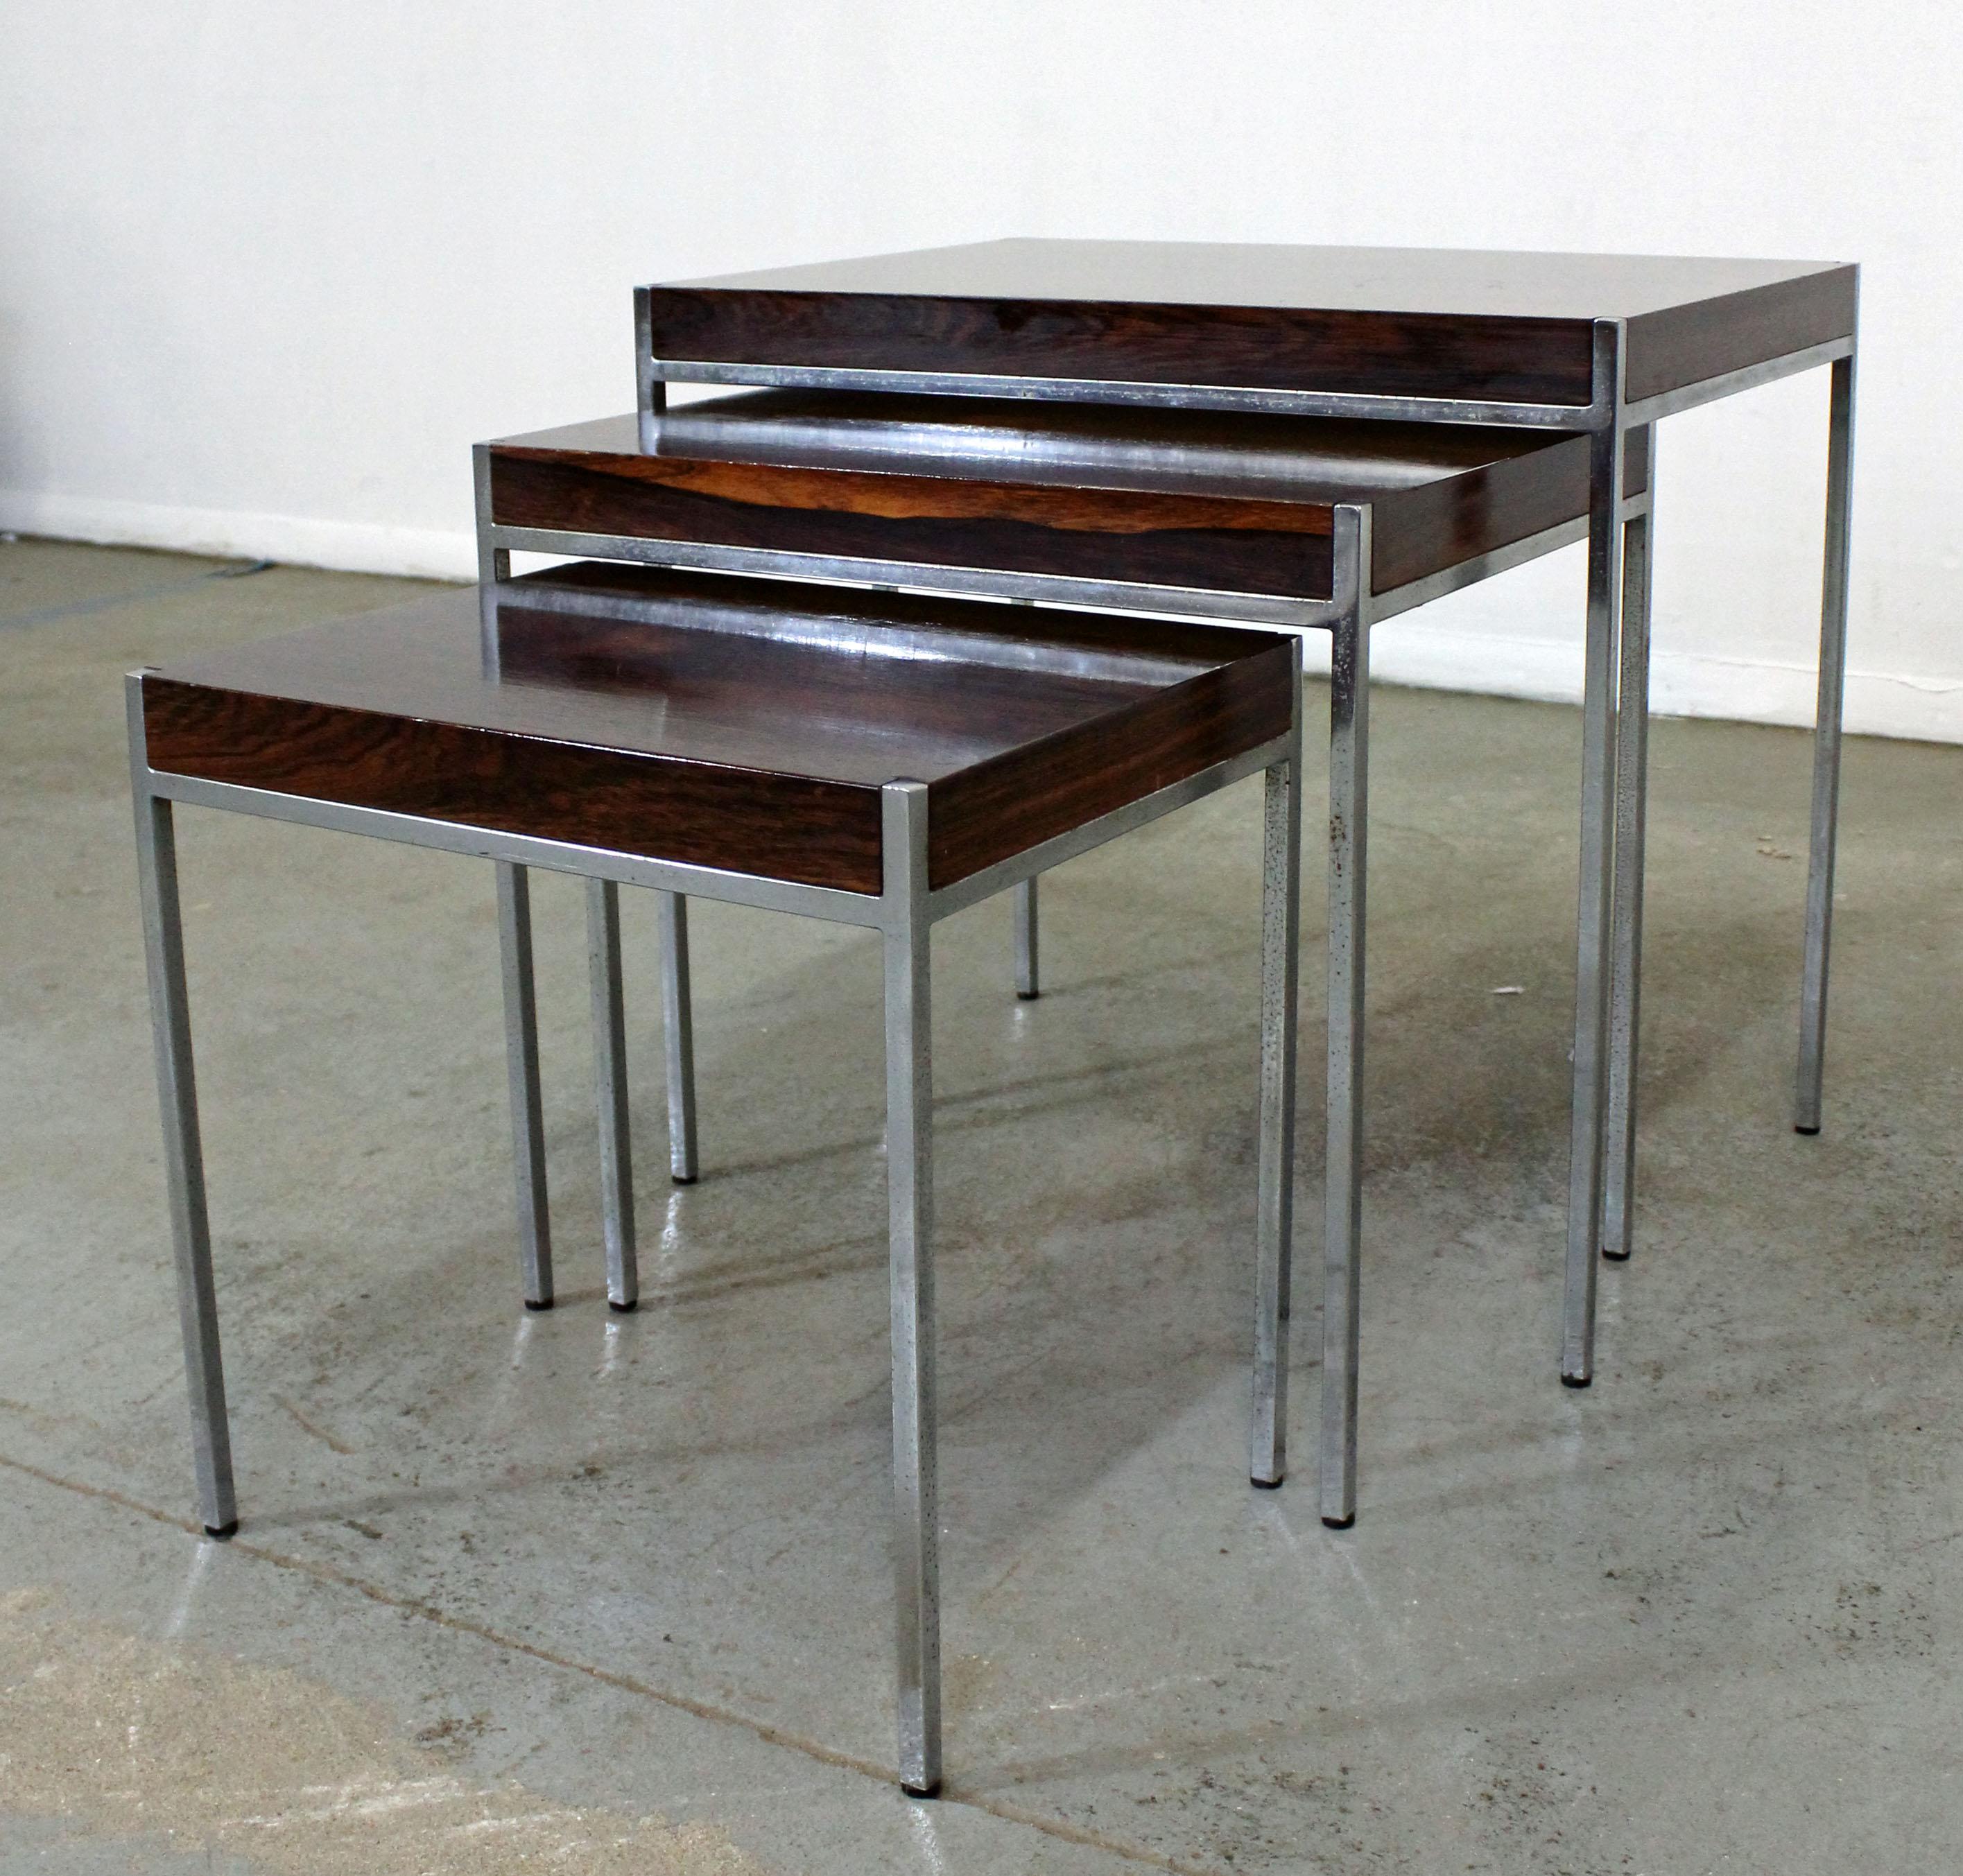 What a find. Offered is a set of 3 rosewood & chrome nesting tables. They are in good condition showing some age wear (patina on legs, surface scratches). We believe they may be by Milo Baughman, but they are not signed.

Approximate